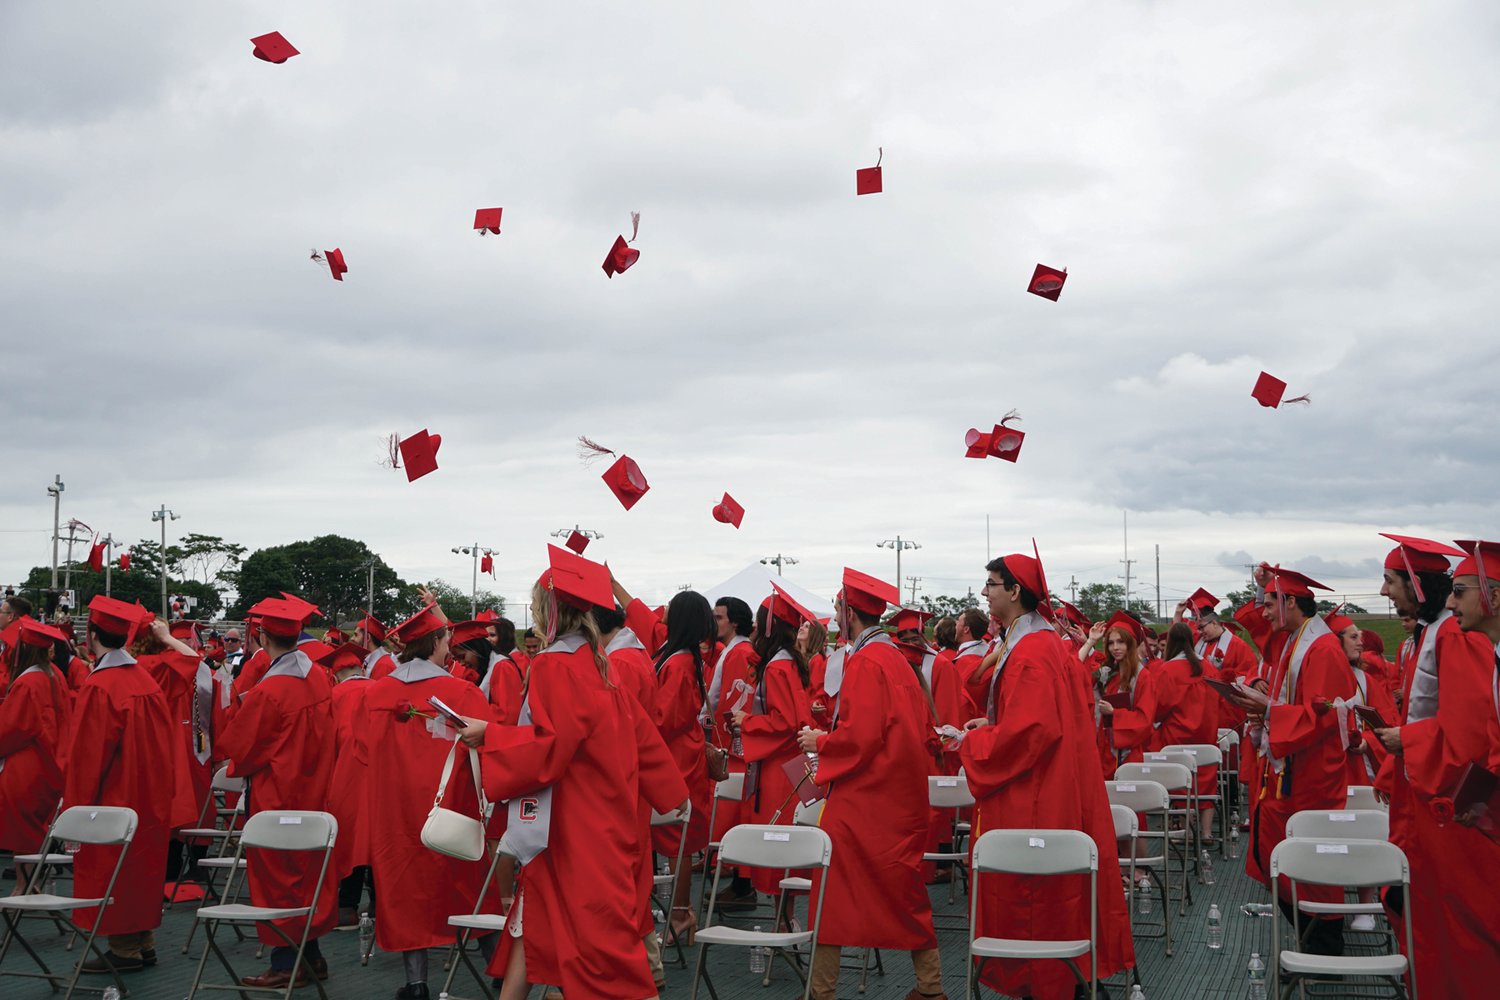 LOOKING UP: The members of the Cranston West class of 2021 throw up their caps in celebration at the end of Saturday’s
graduation ceremony at Cranston Stadium. (Herald photos by Stephanie Bernaba)